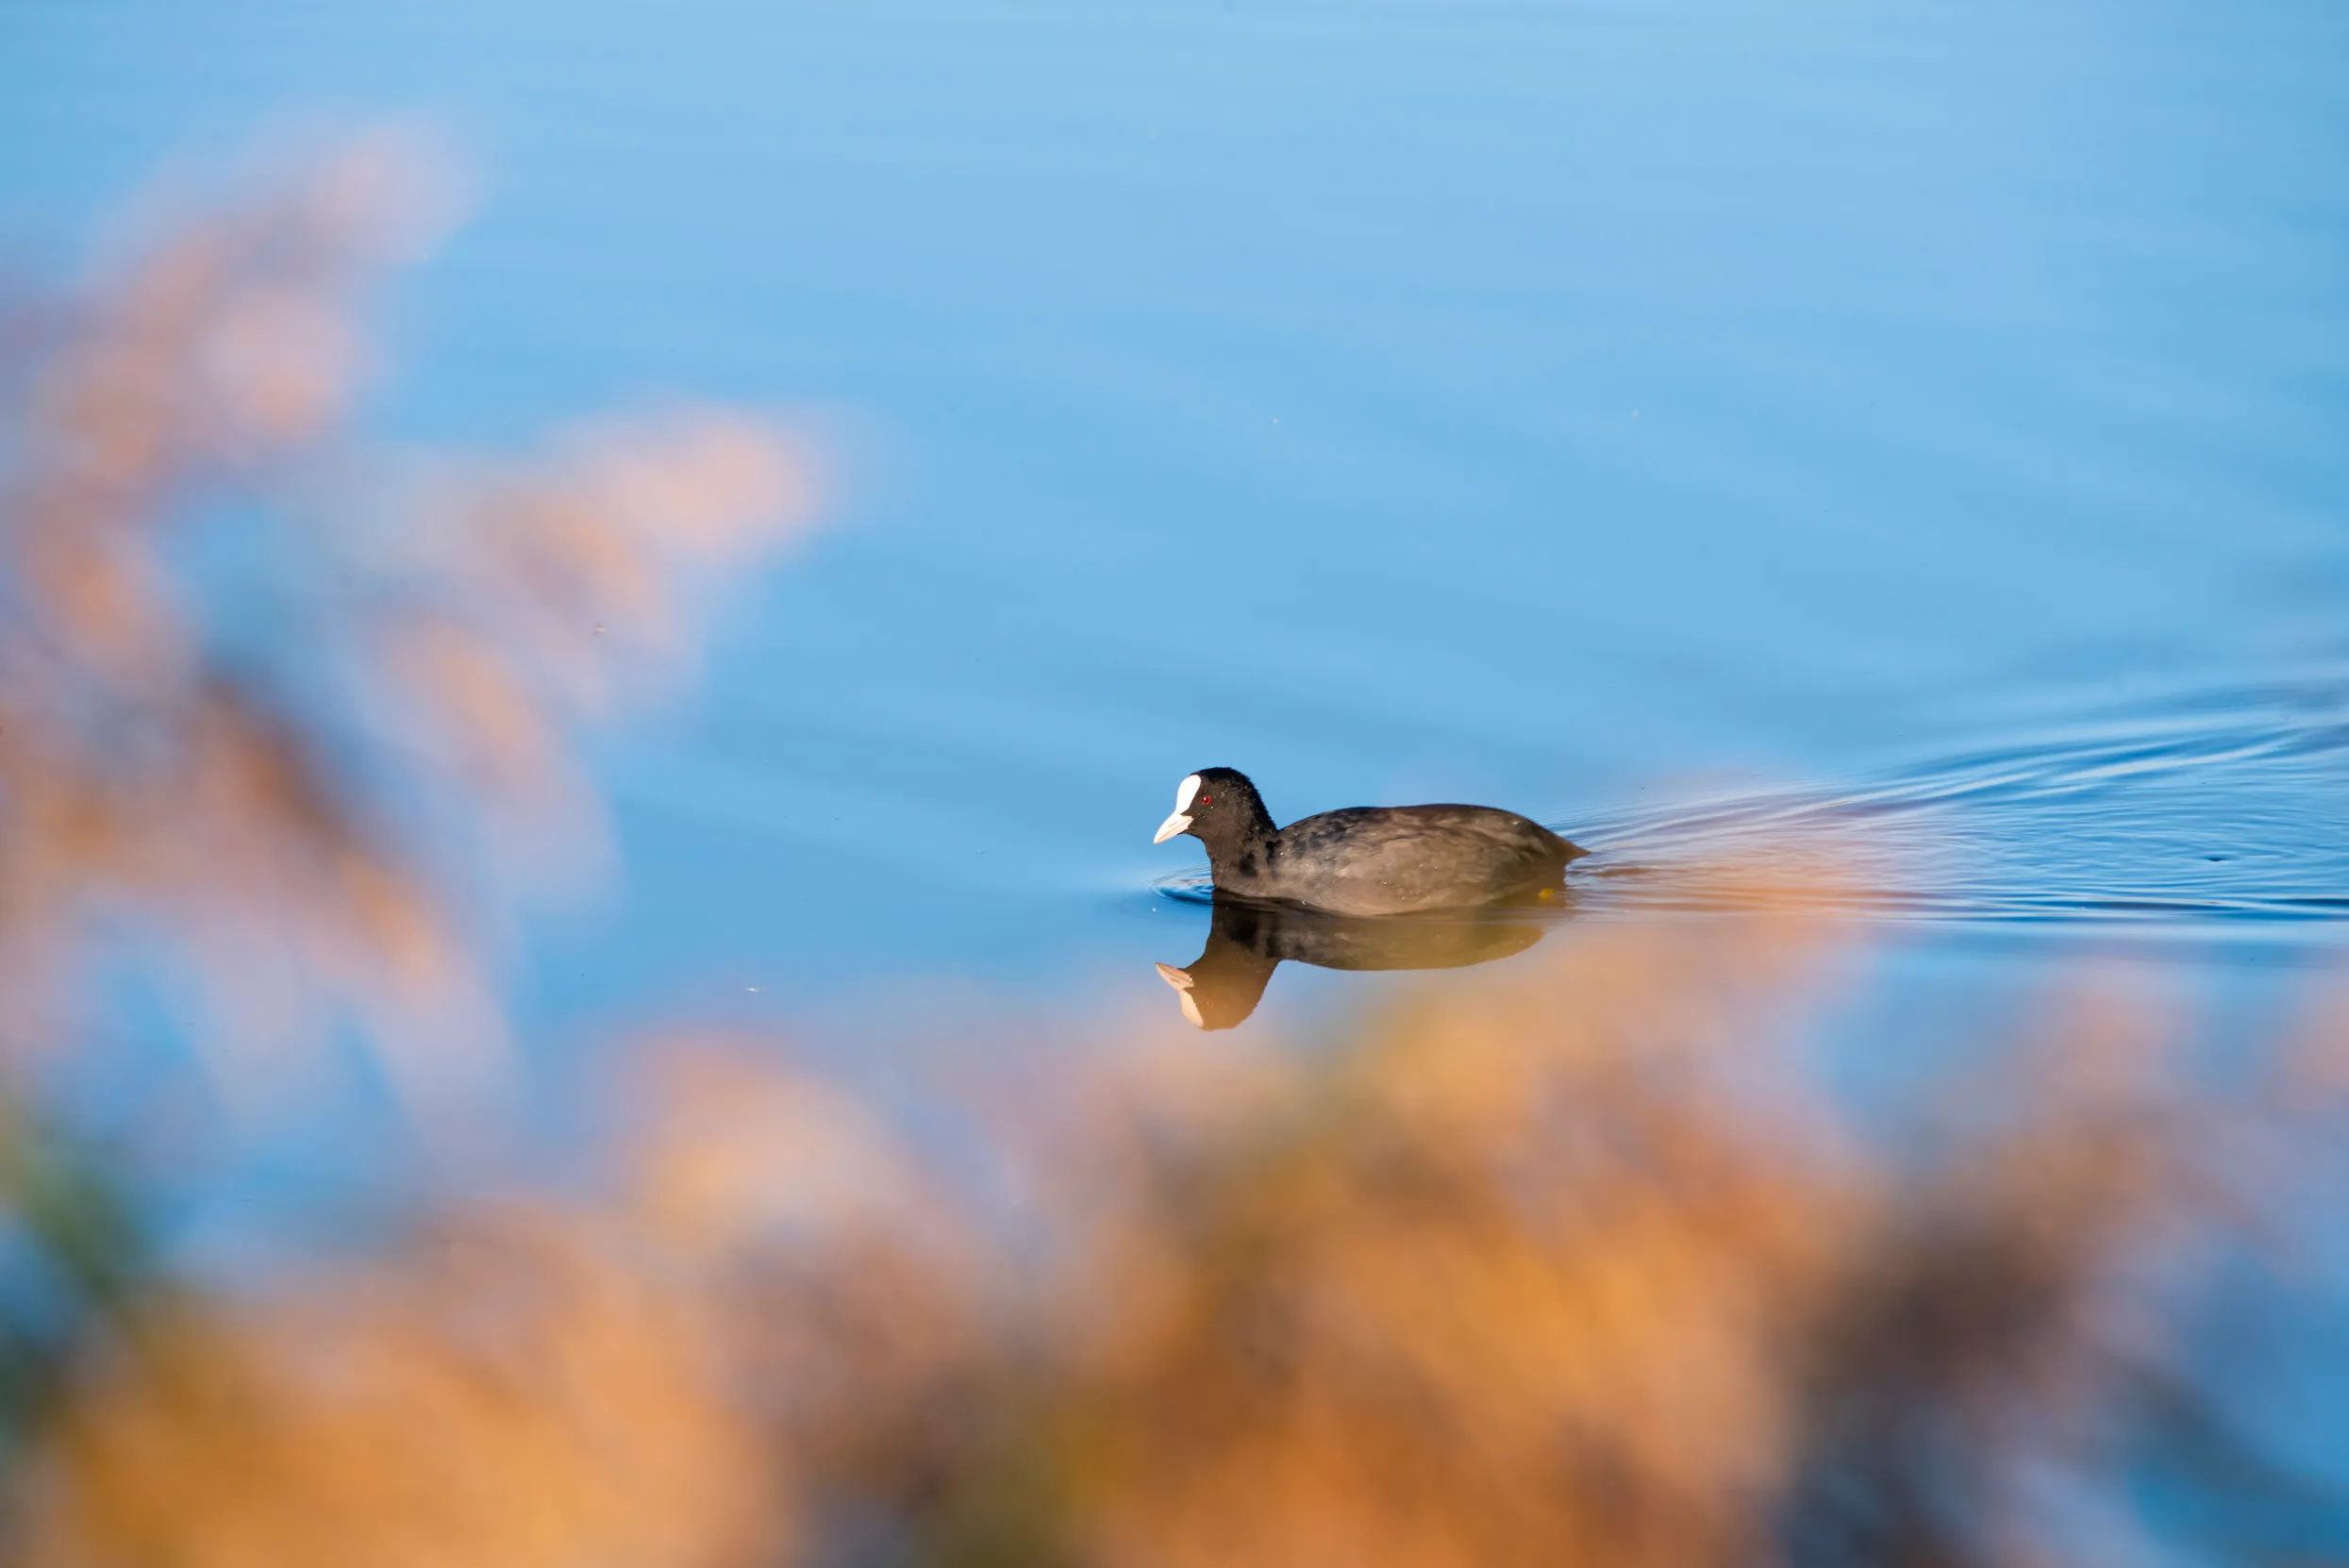 Lone Coot swimming through calm water, with blurry golden leaves in the foreground  